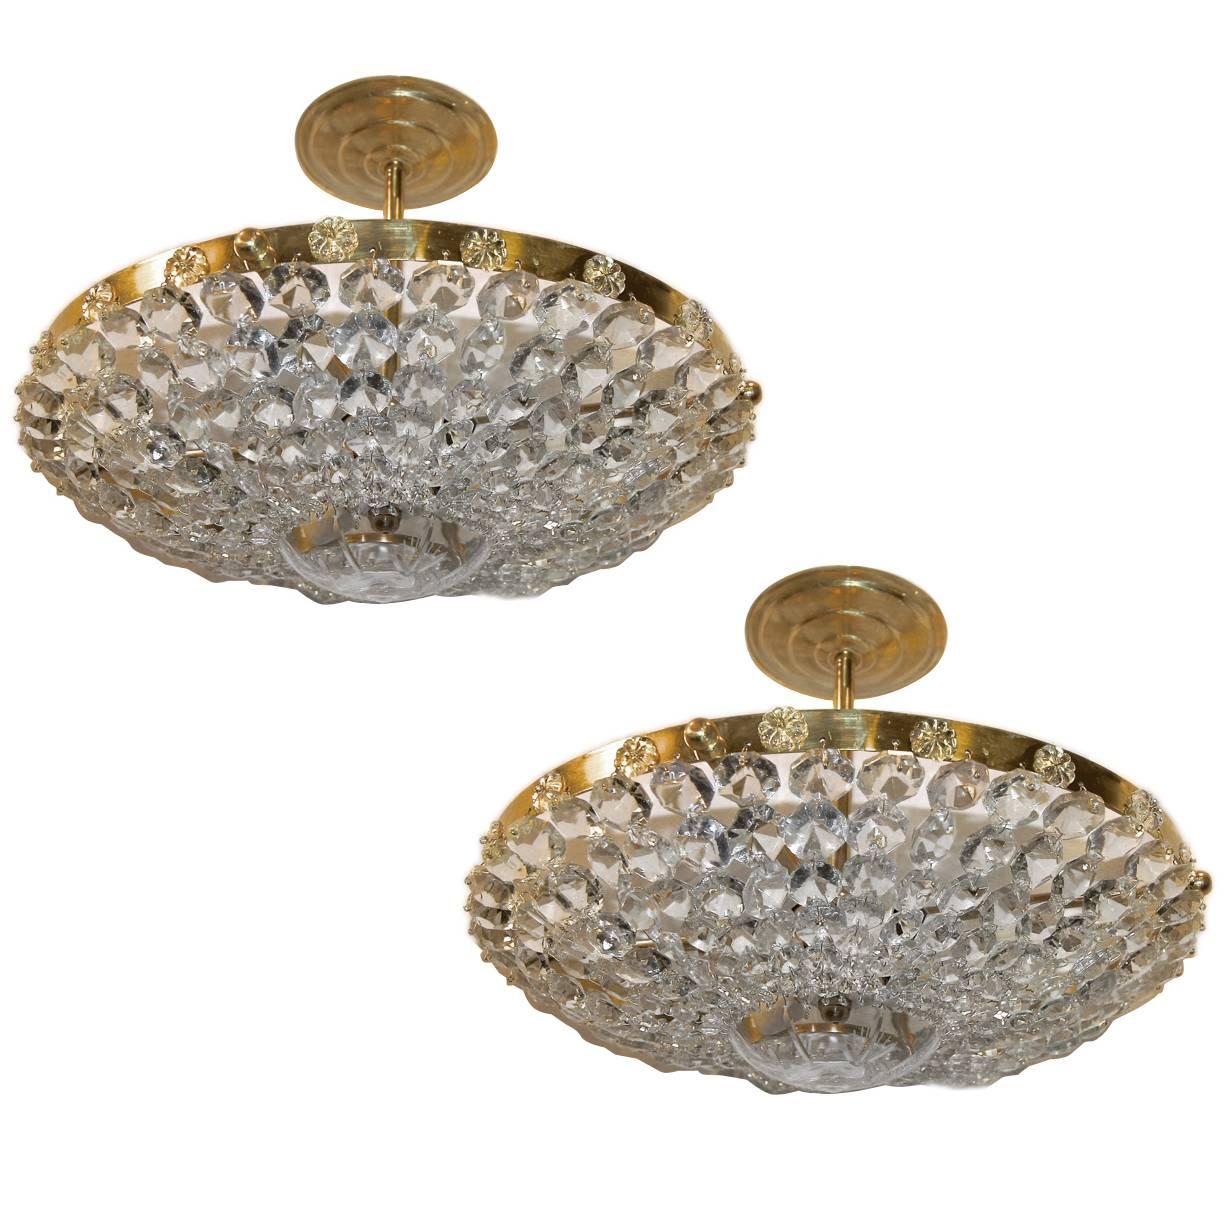 Set of 12 circa 1940's French crystal pendant light fixtures with three interior lights and crystal rosettes on body. Sold individually.

Measurements:
Drop: 7.5